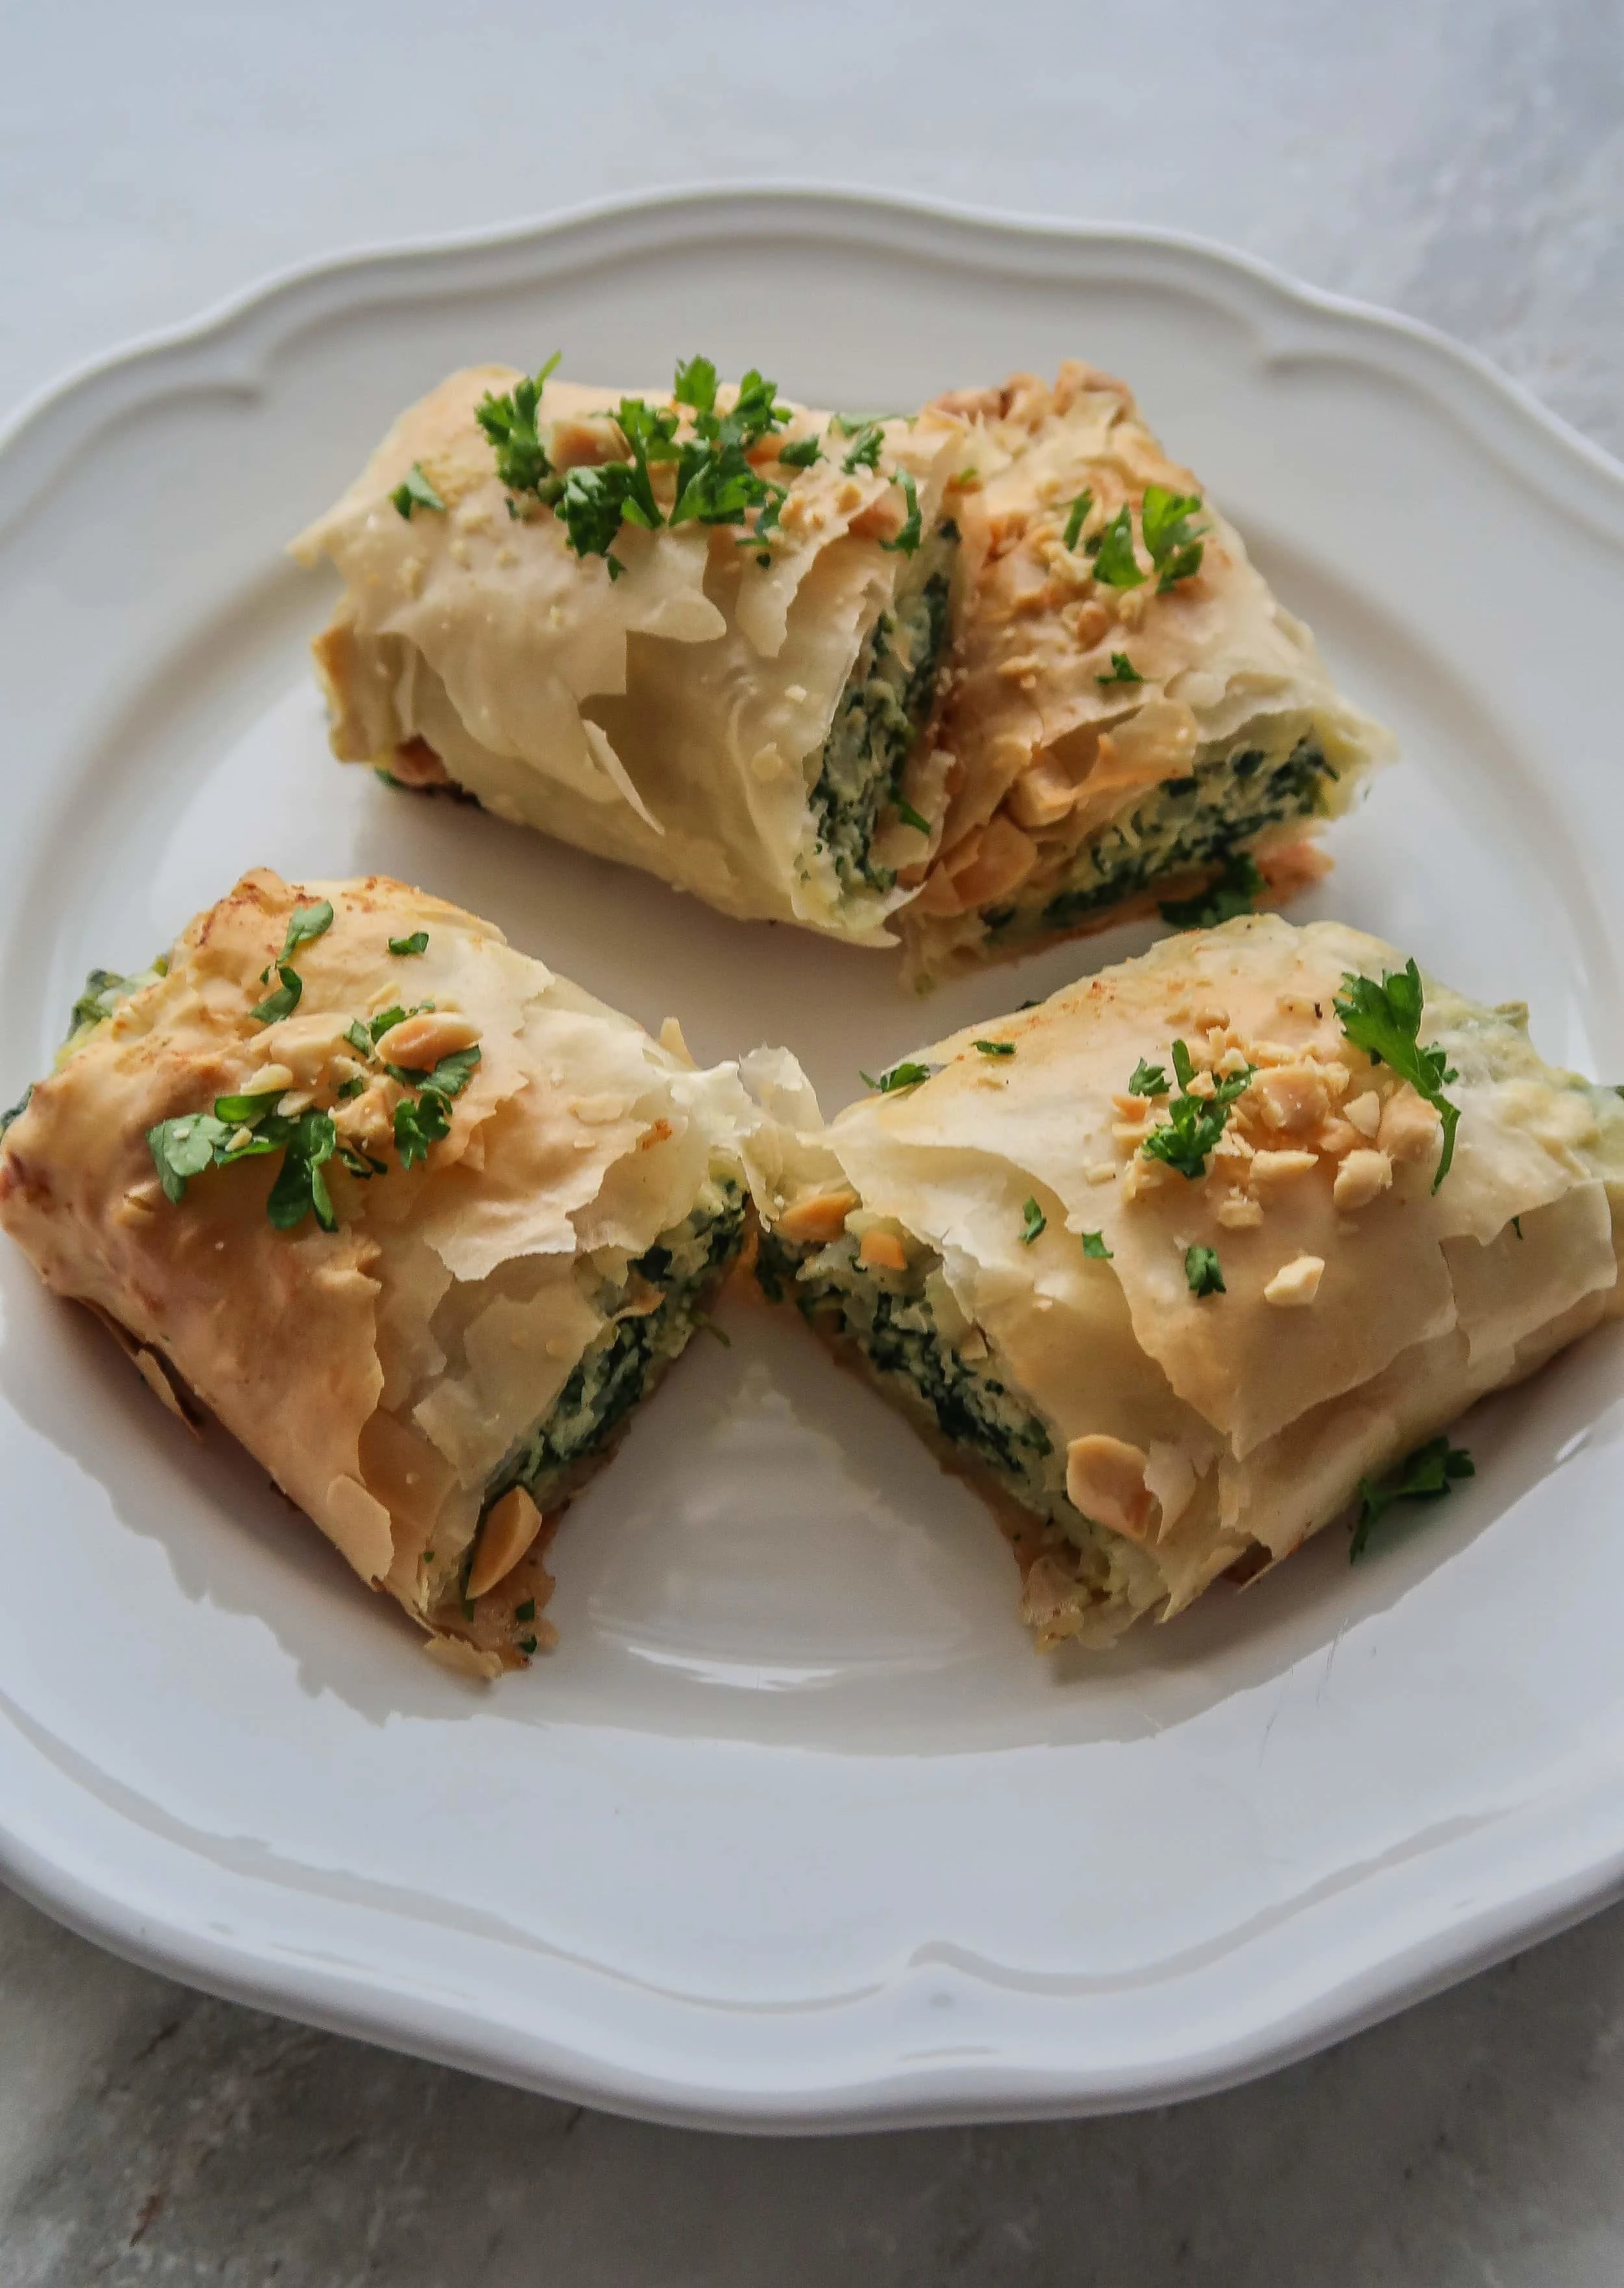 A plate with four Spinach and Ricotta Spanakopita Roll halves.